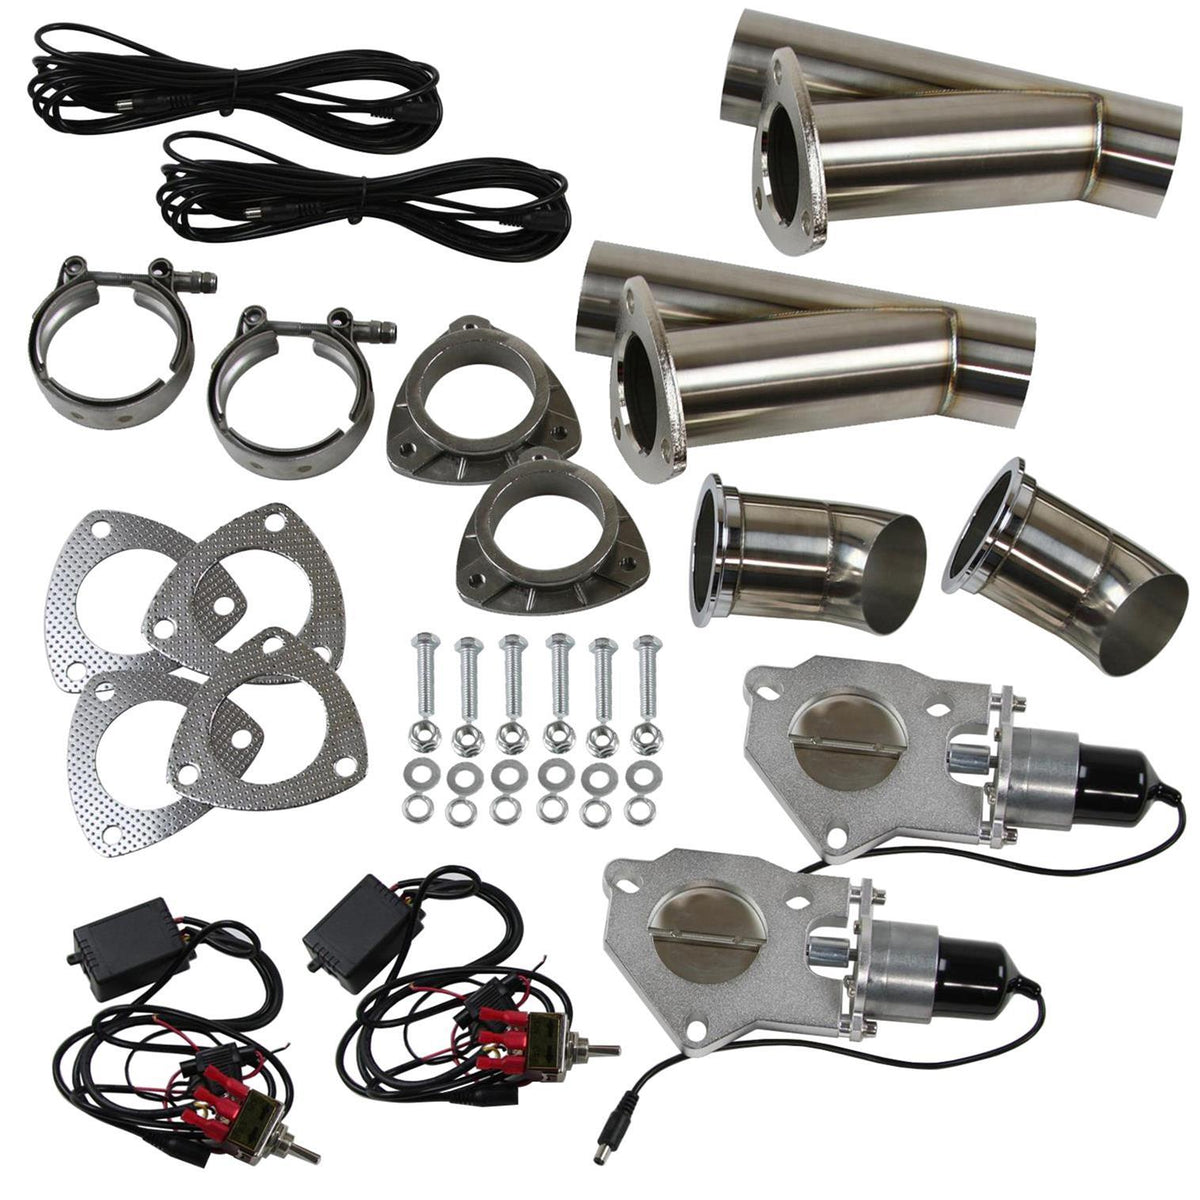 Cutout, 3.0 inch Electric Exhaust Cut Out Dual Kit